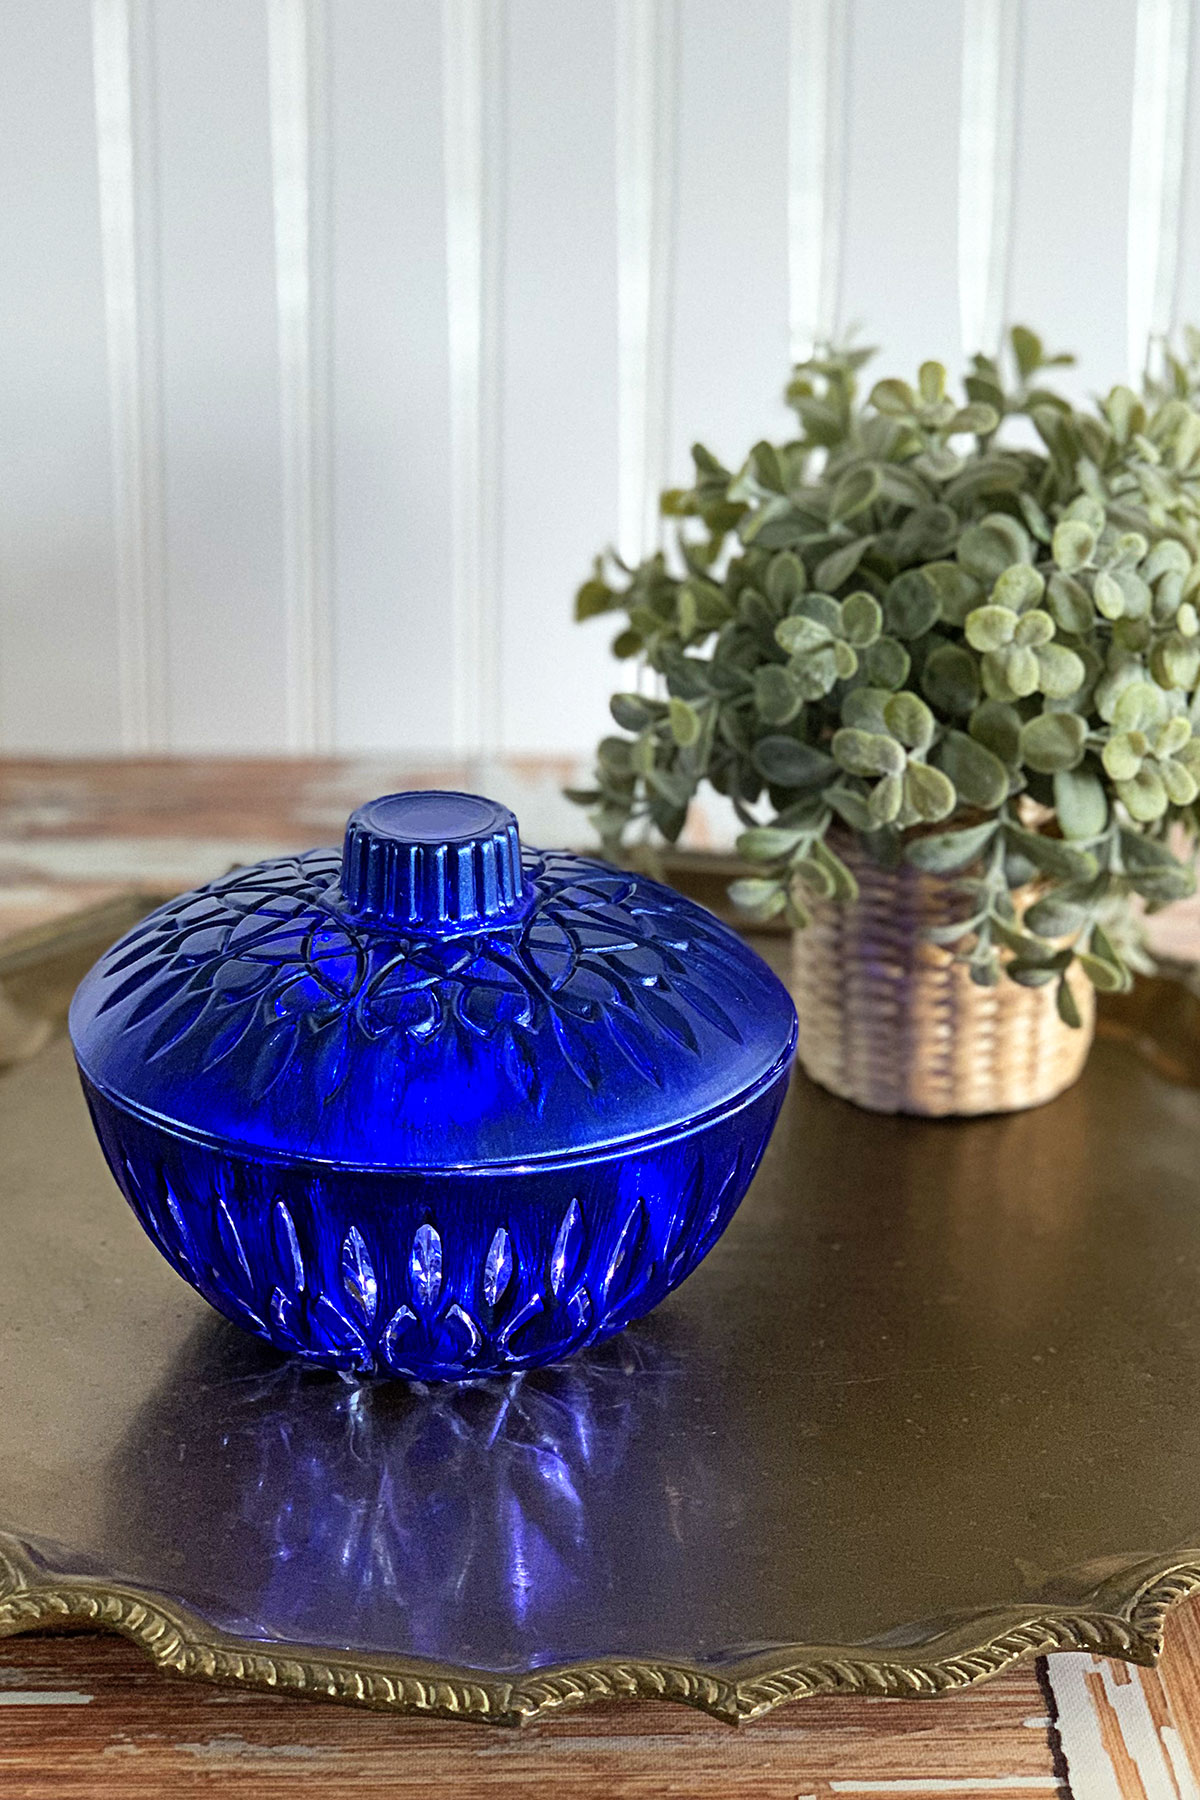 How to upcycle thrift store glass to make unique and stylish home decor - a blue glass candy dish setting on a bronze serving tray.